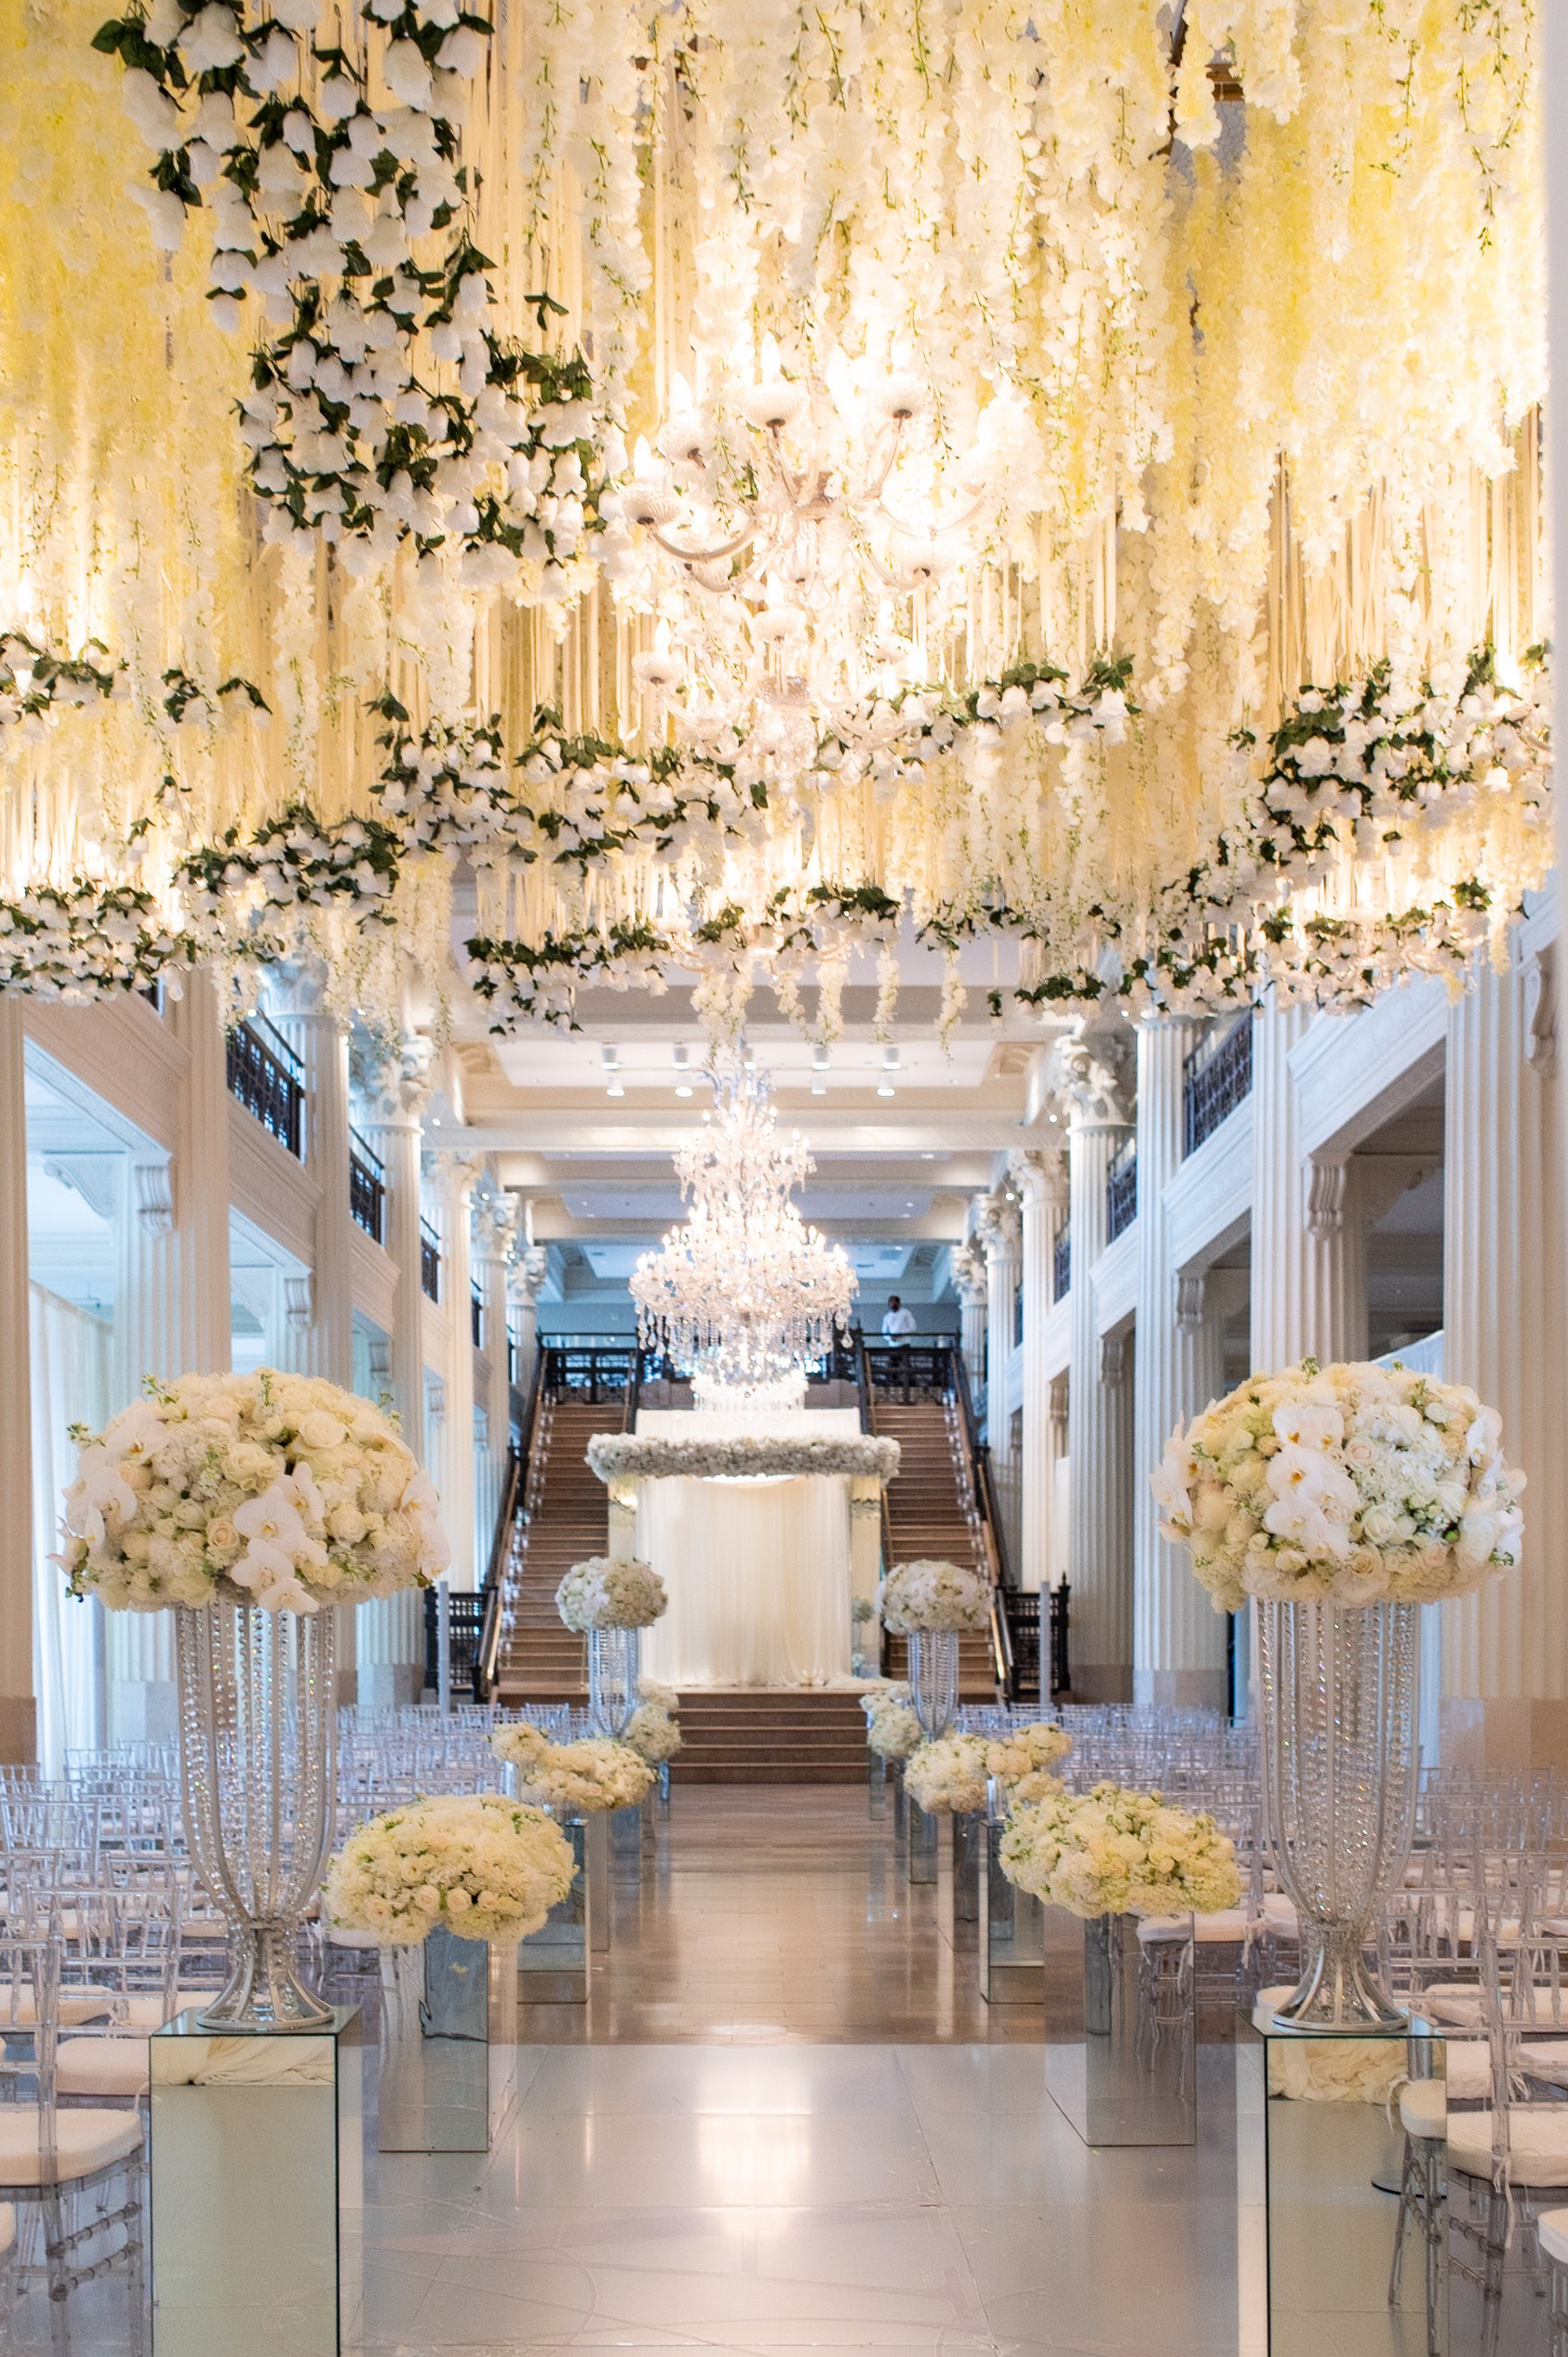 Ceiling hanging white floral decor for a traditional wedding in The Corinthian Houston.